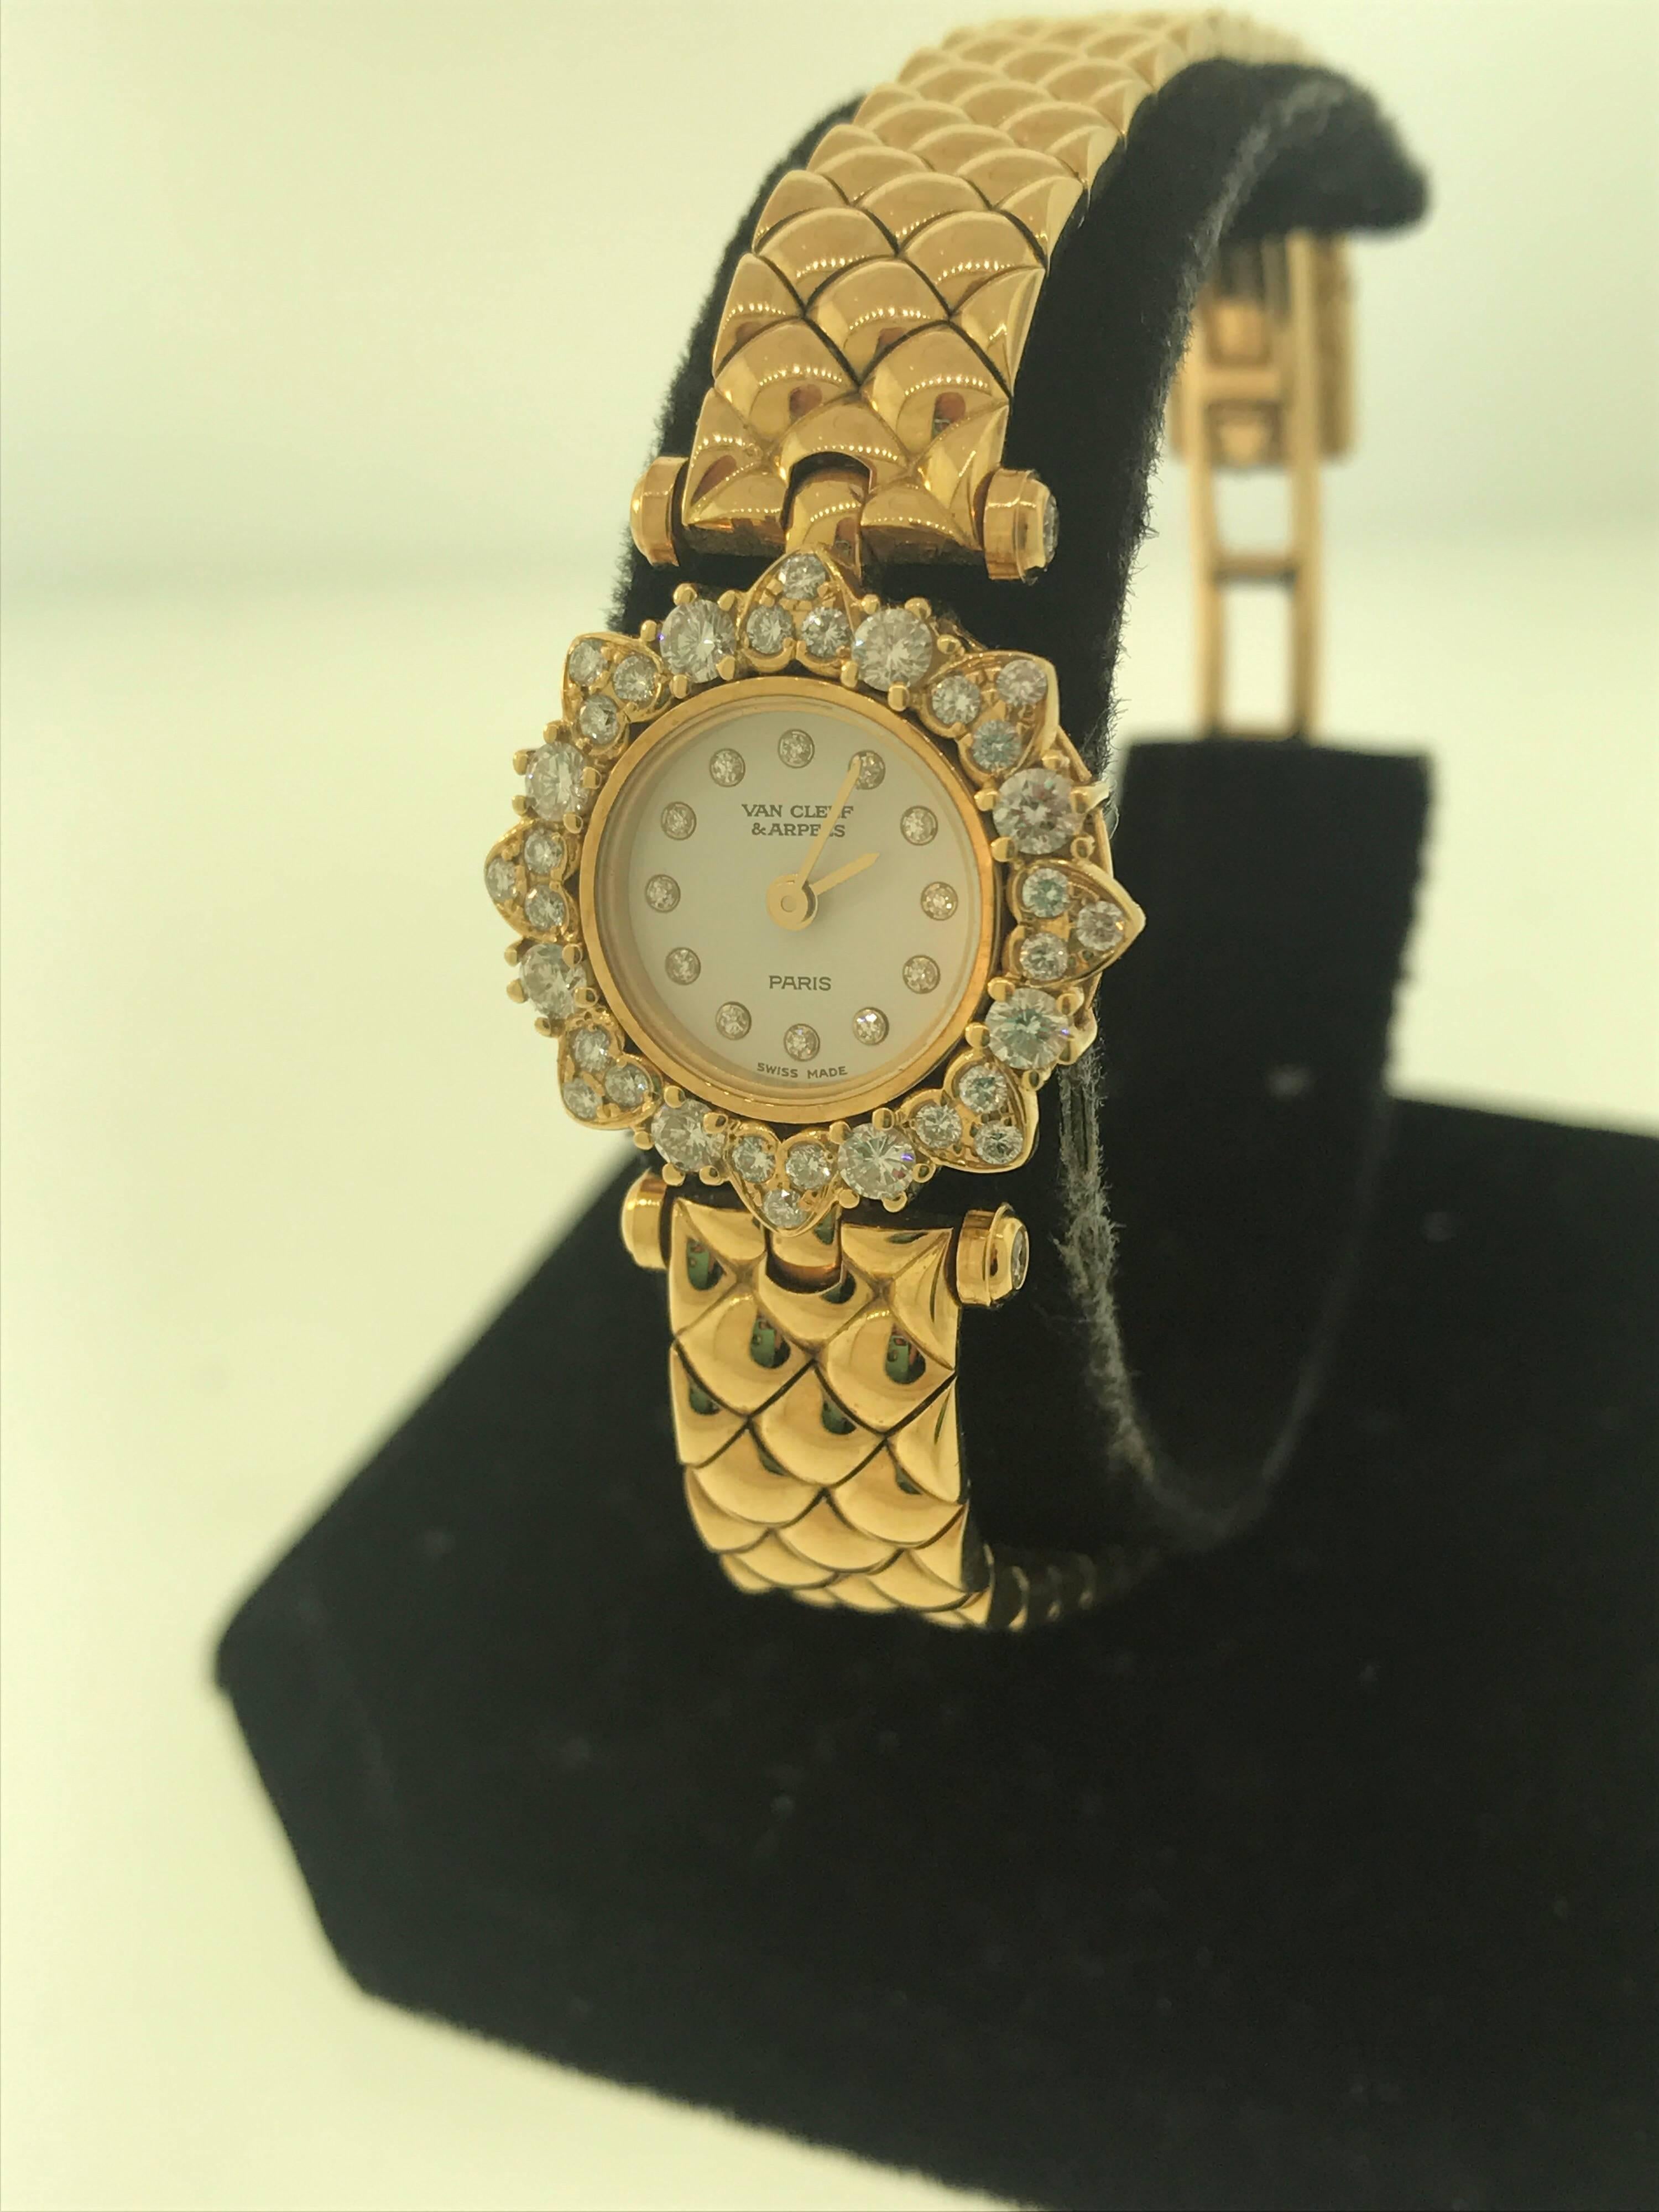 Van Cleef & Arpels Classique Yellow Gold & Diamond Bracelet Ladies Watch 130955 In Excellent Condition For Sale In New York, NY